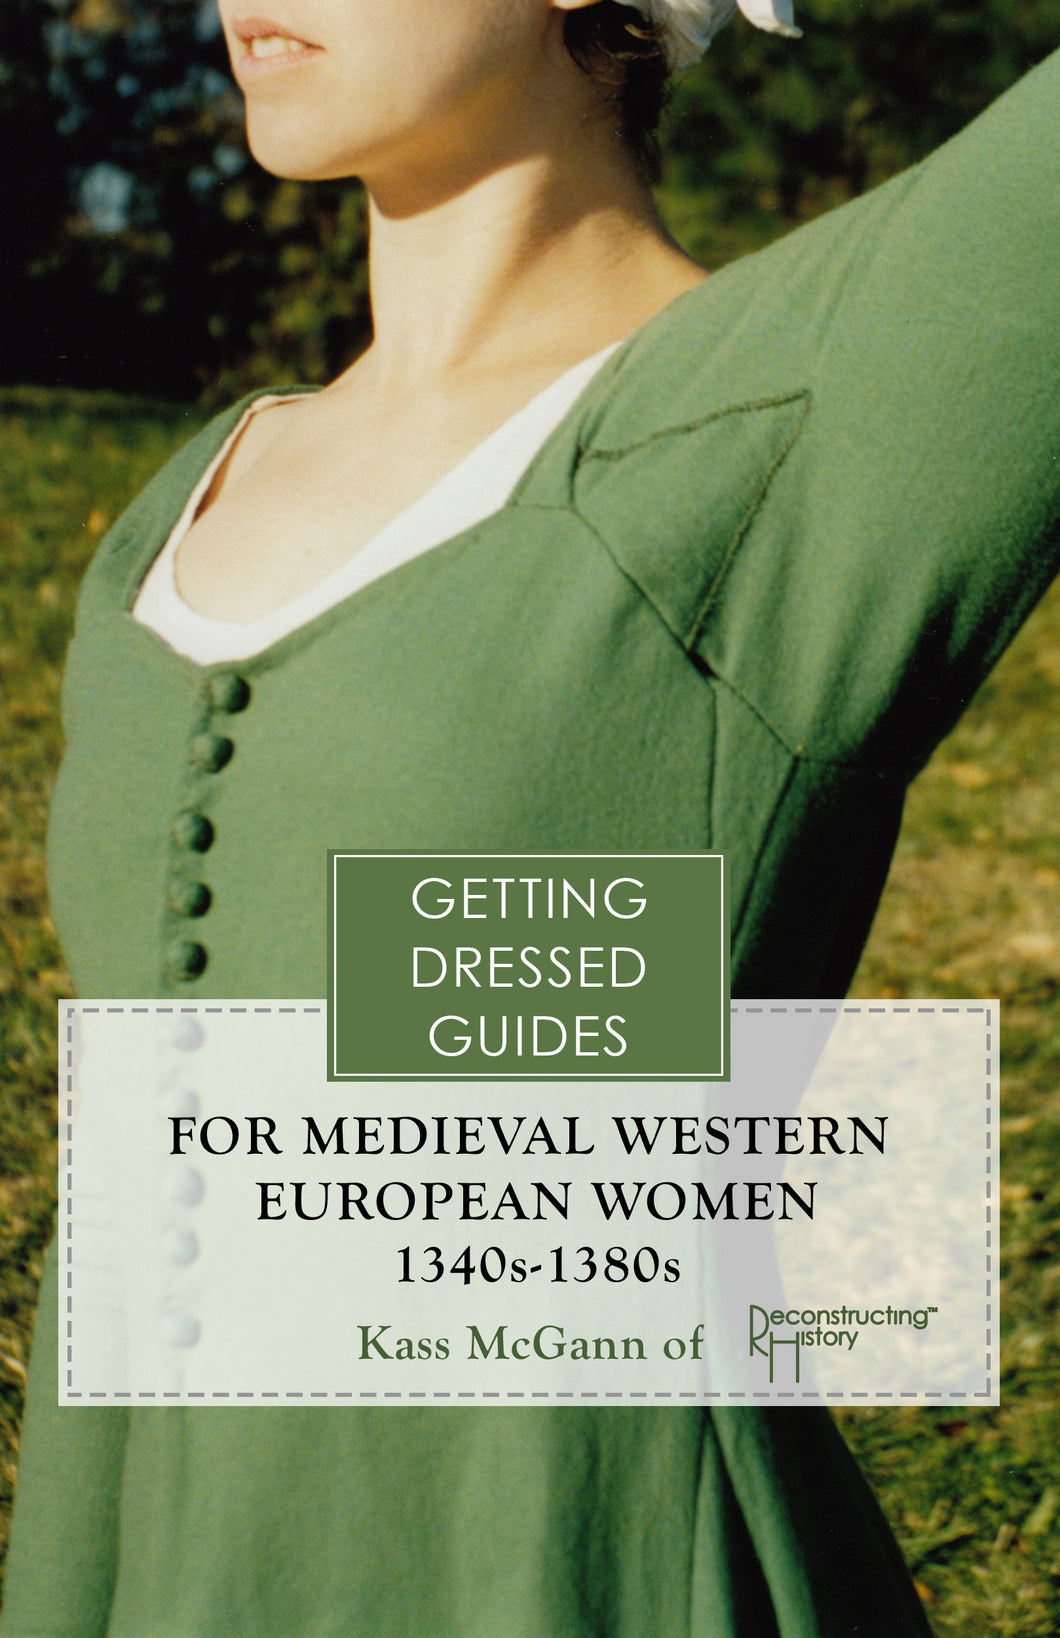 14th century Women's Getting Dressed Guide